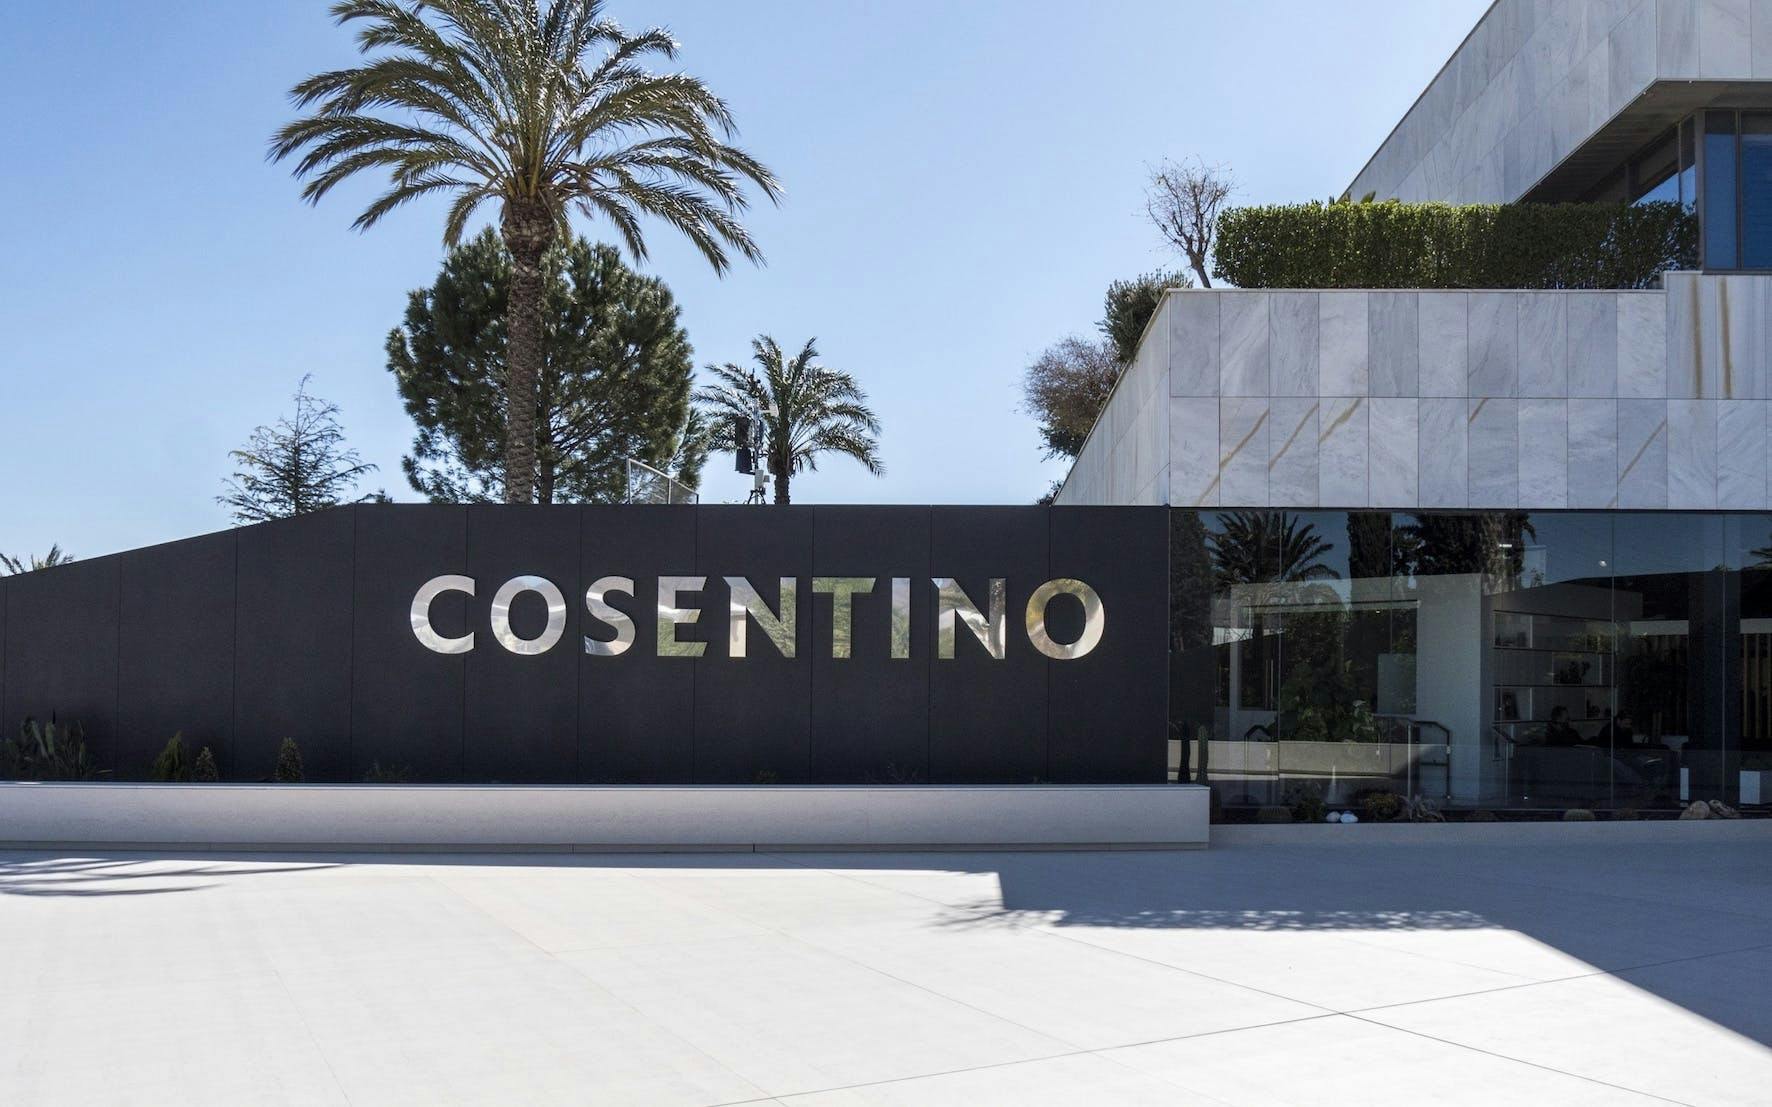 Image 31 of Entrada HQ Cosentino in Cosentino Group, the first company in the world to obtain ISO 20400:2017 certification - Cosentino